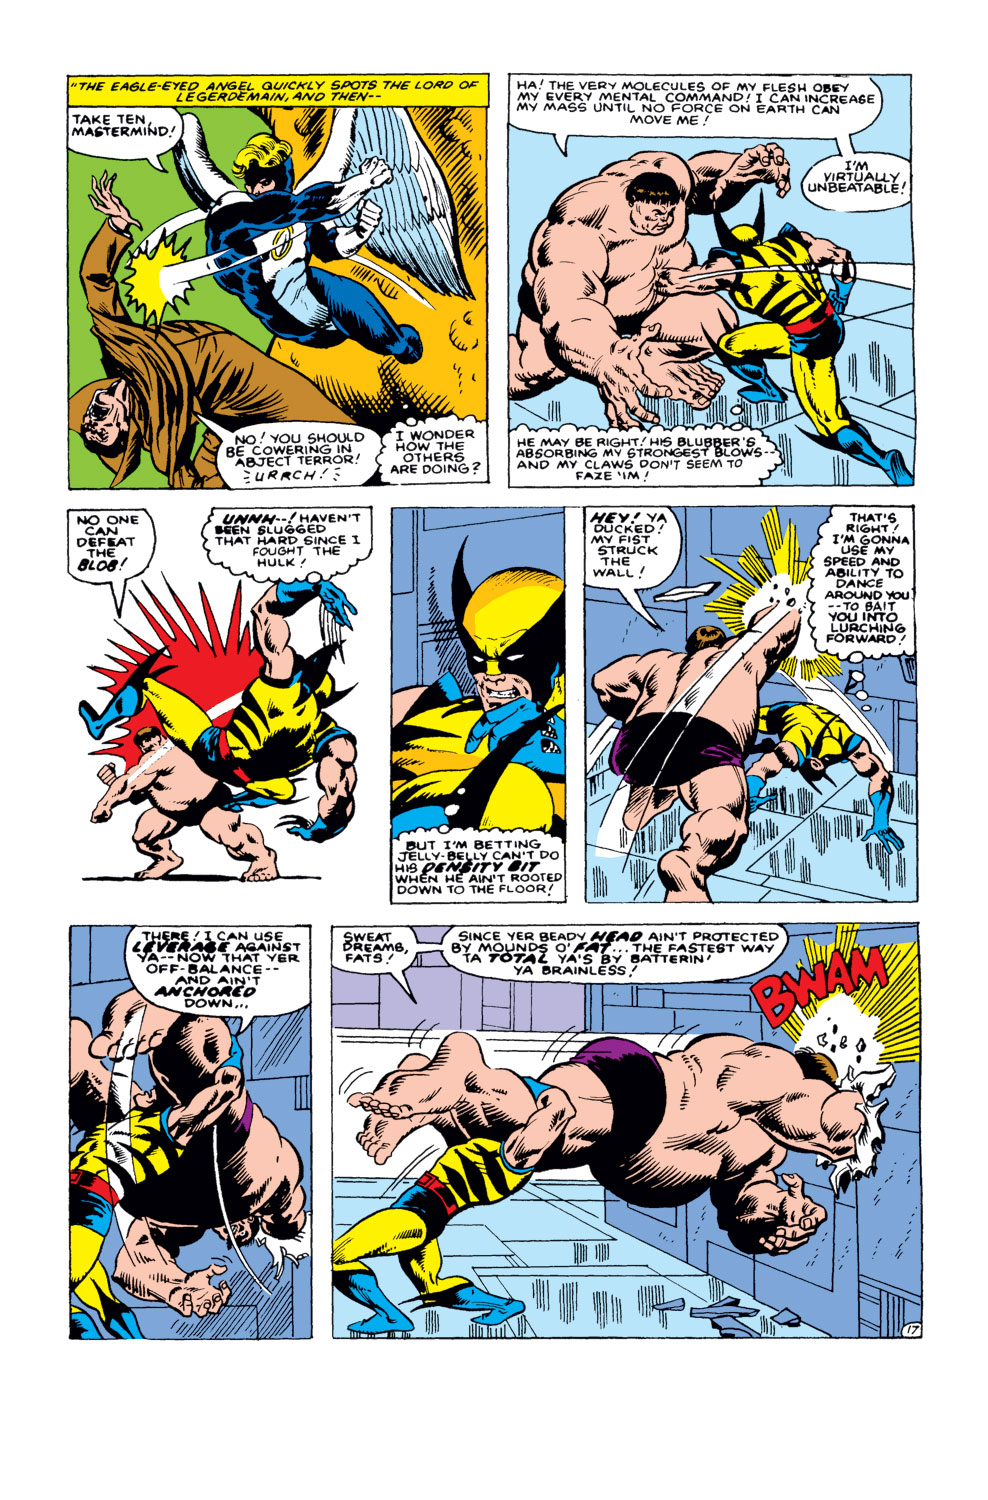 What If? (1977) issue 31 - Wolverine had killed the Hulk - Page 18